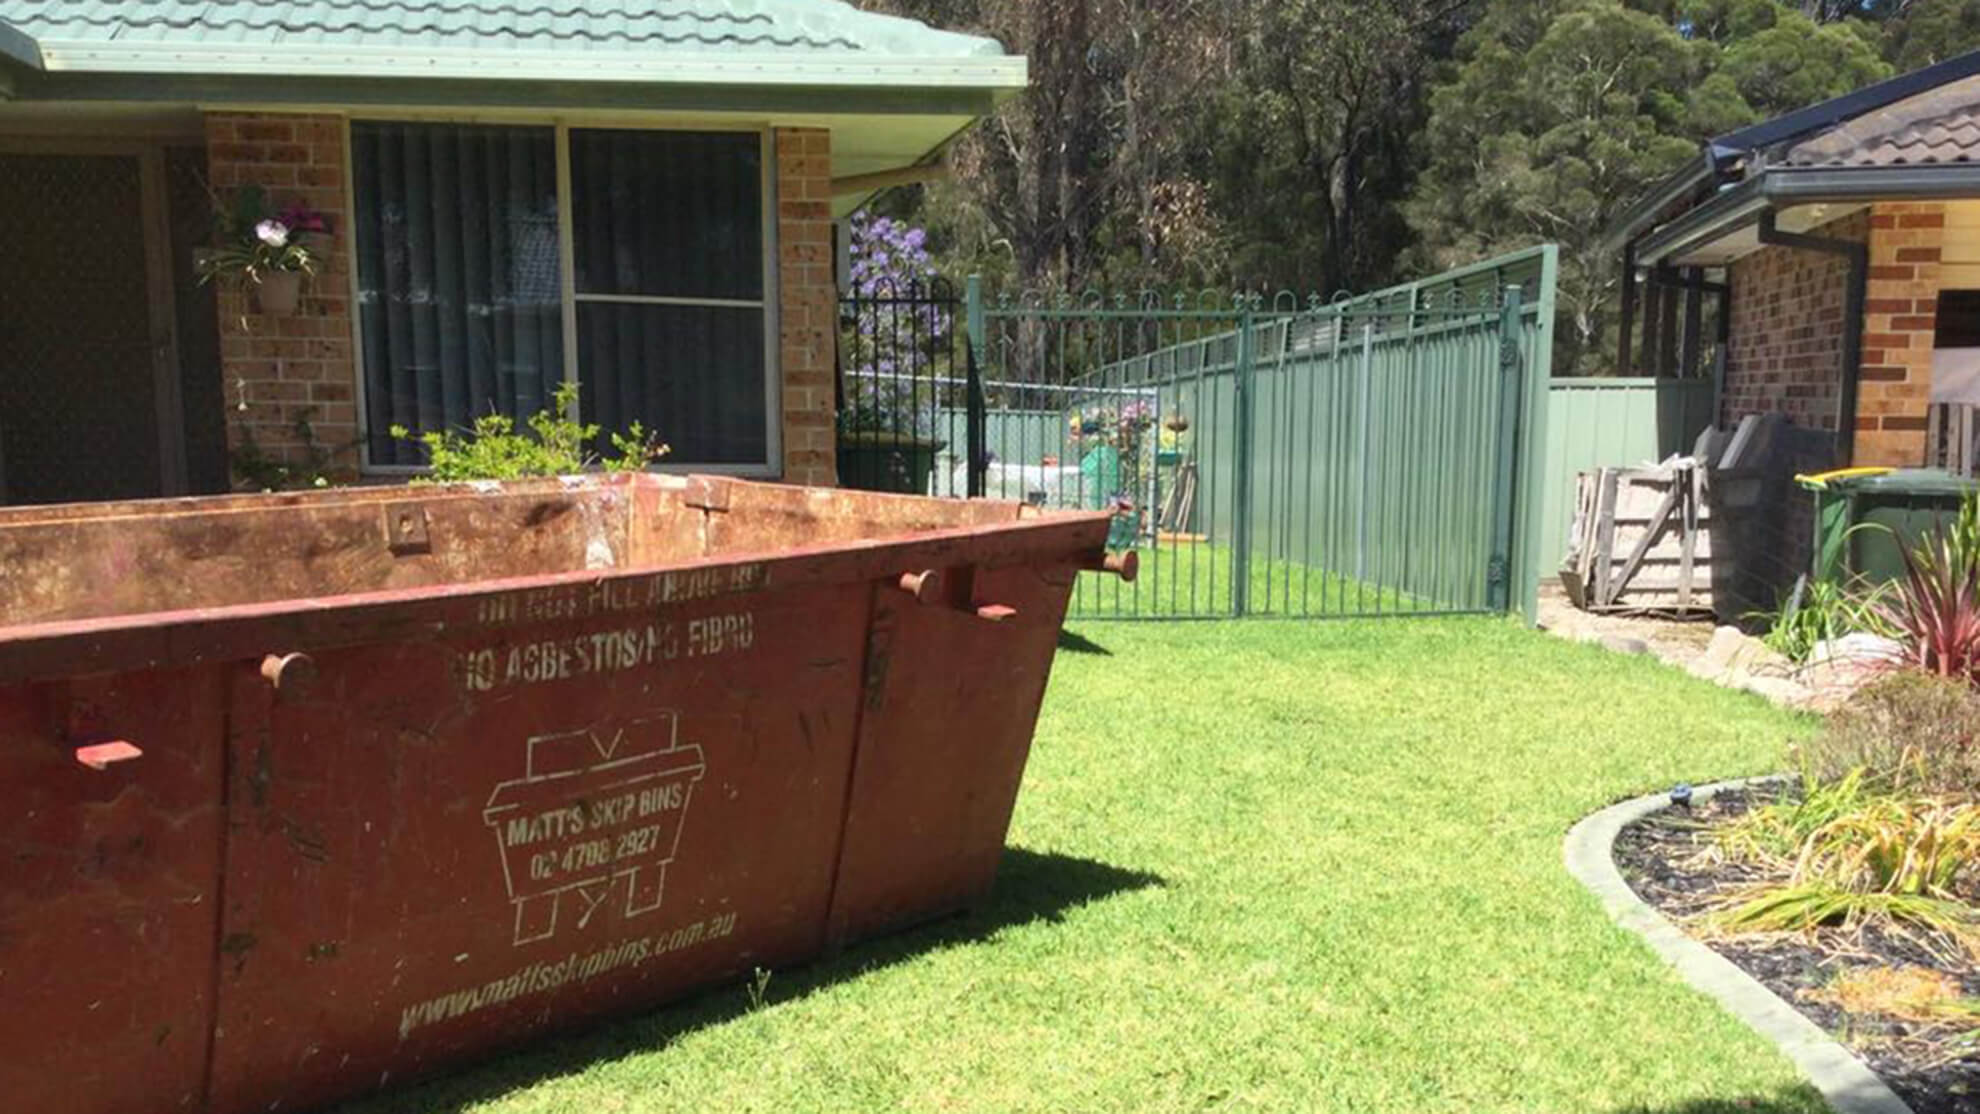 What our skip bins are doing to benefit the environment